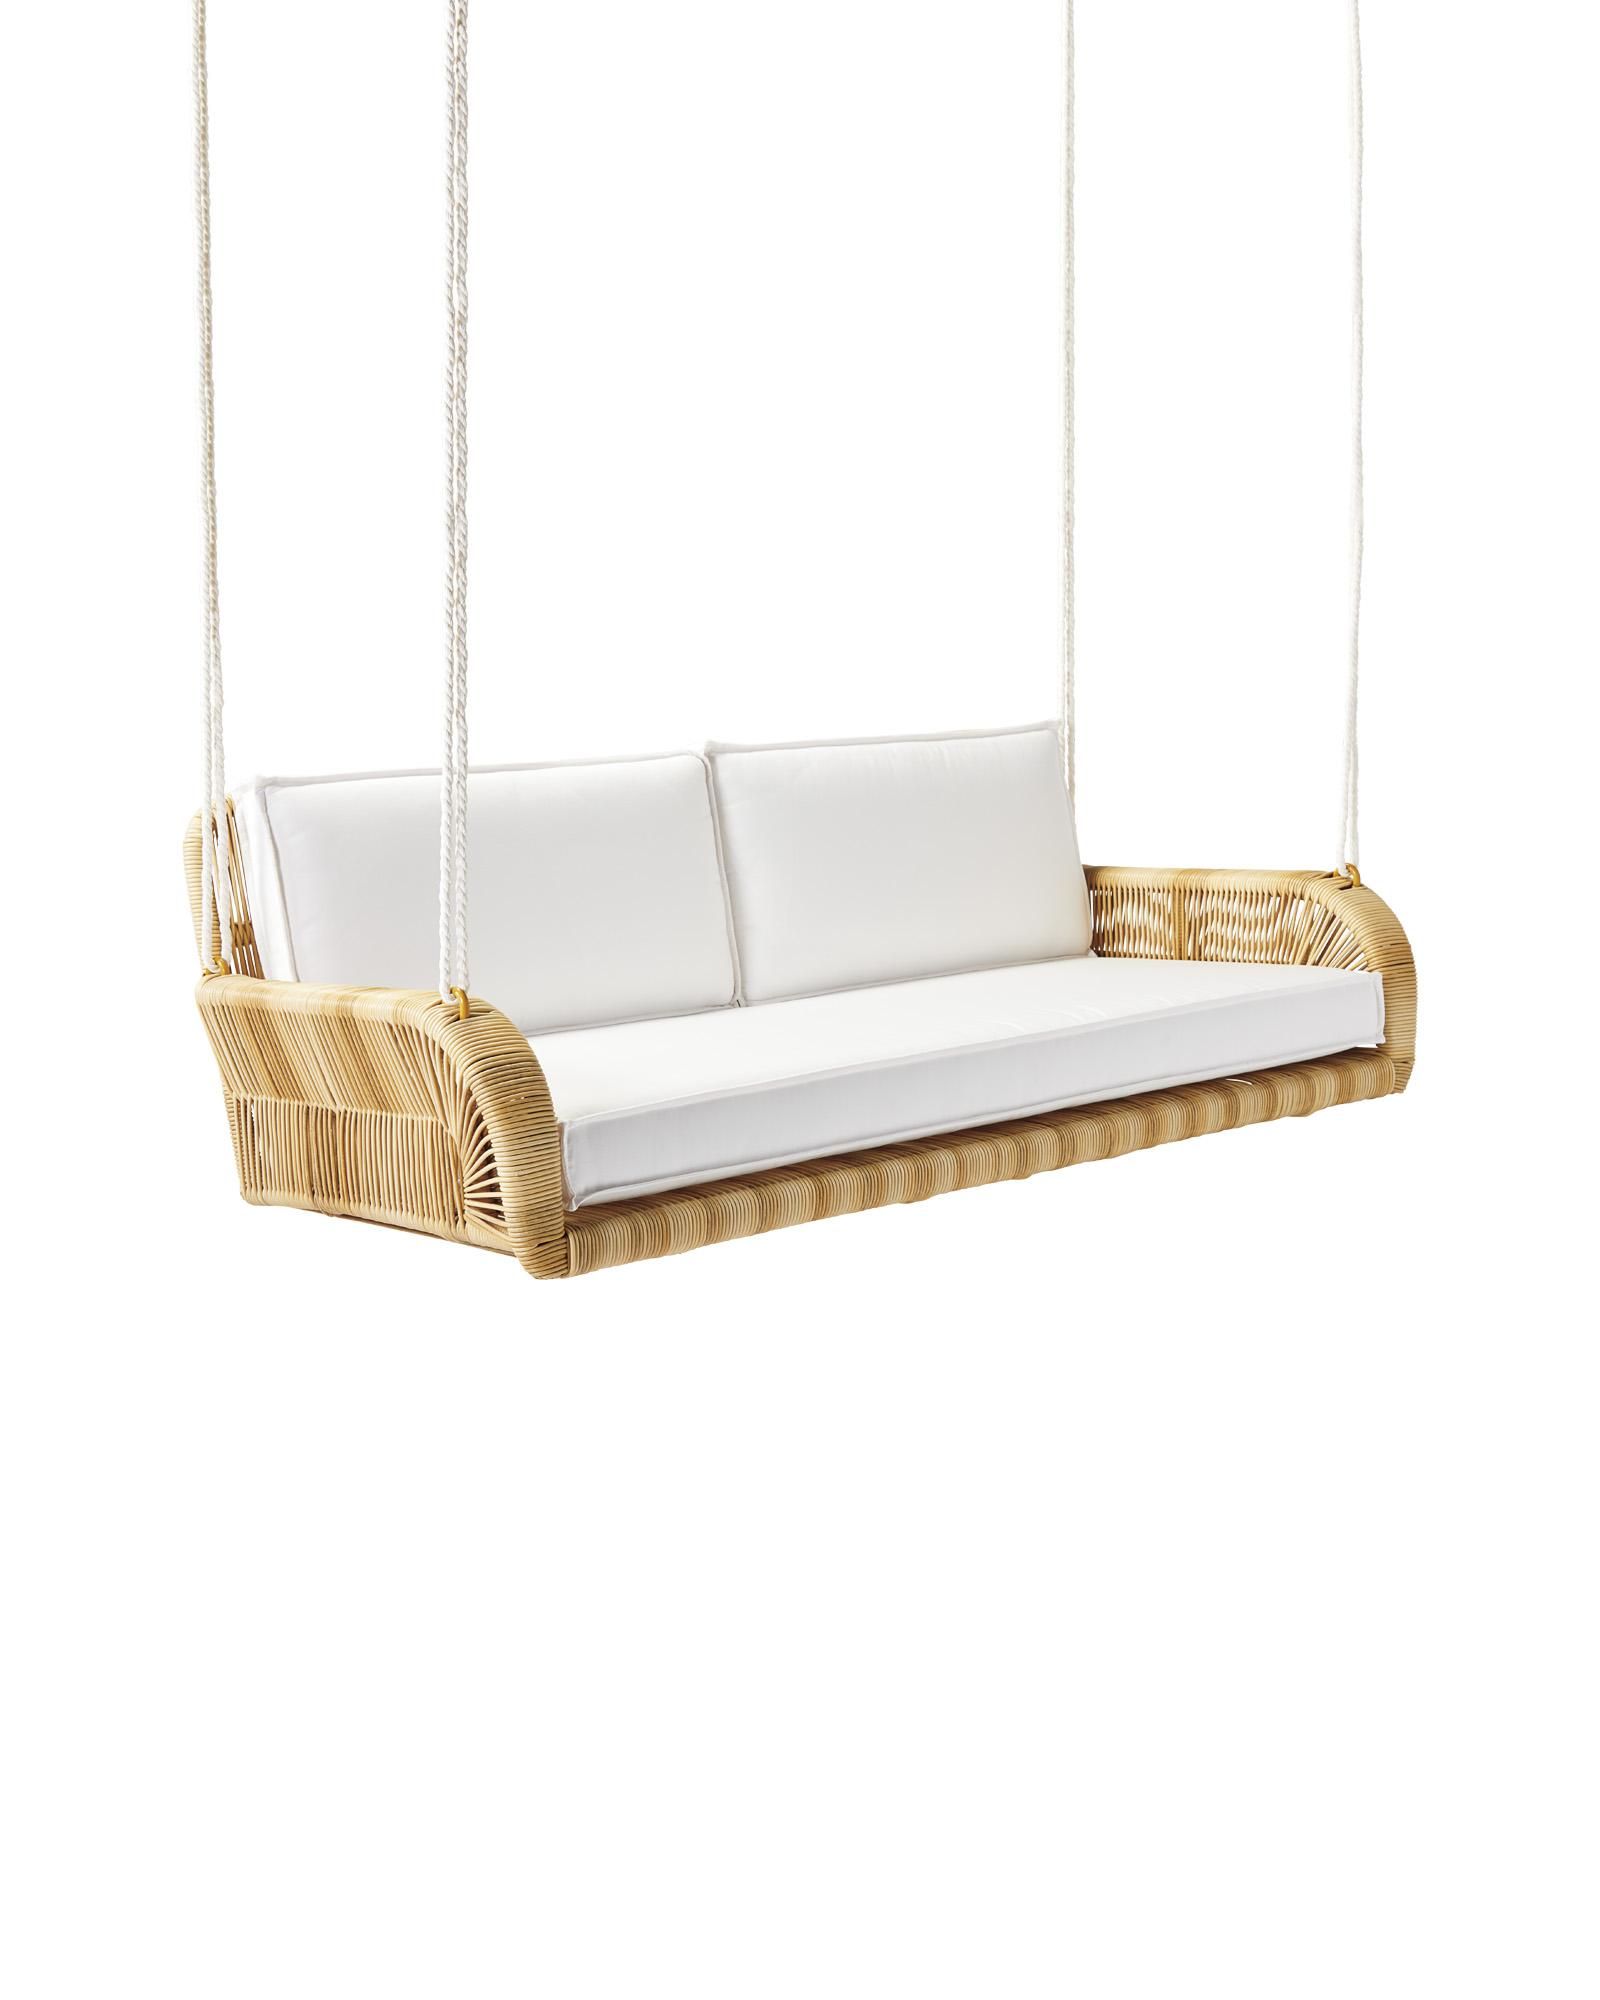 Springwood Hanging Daybed | Serena and Lily